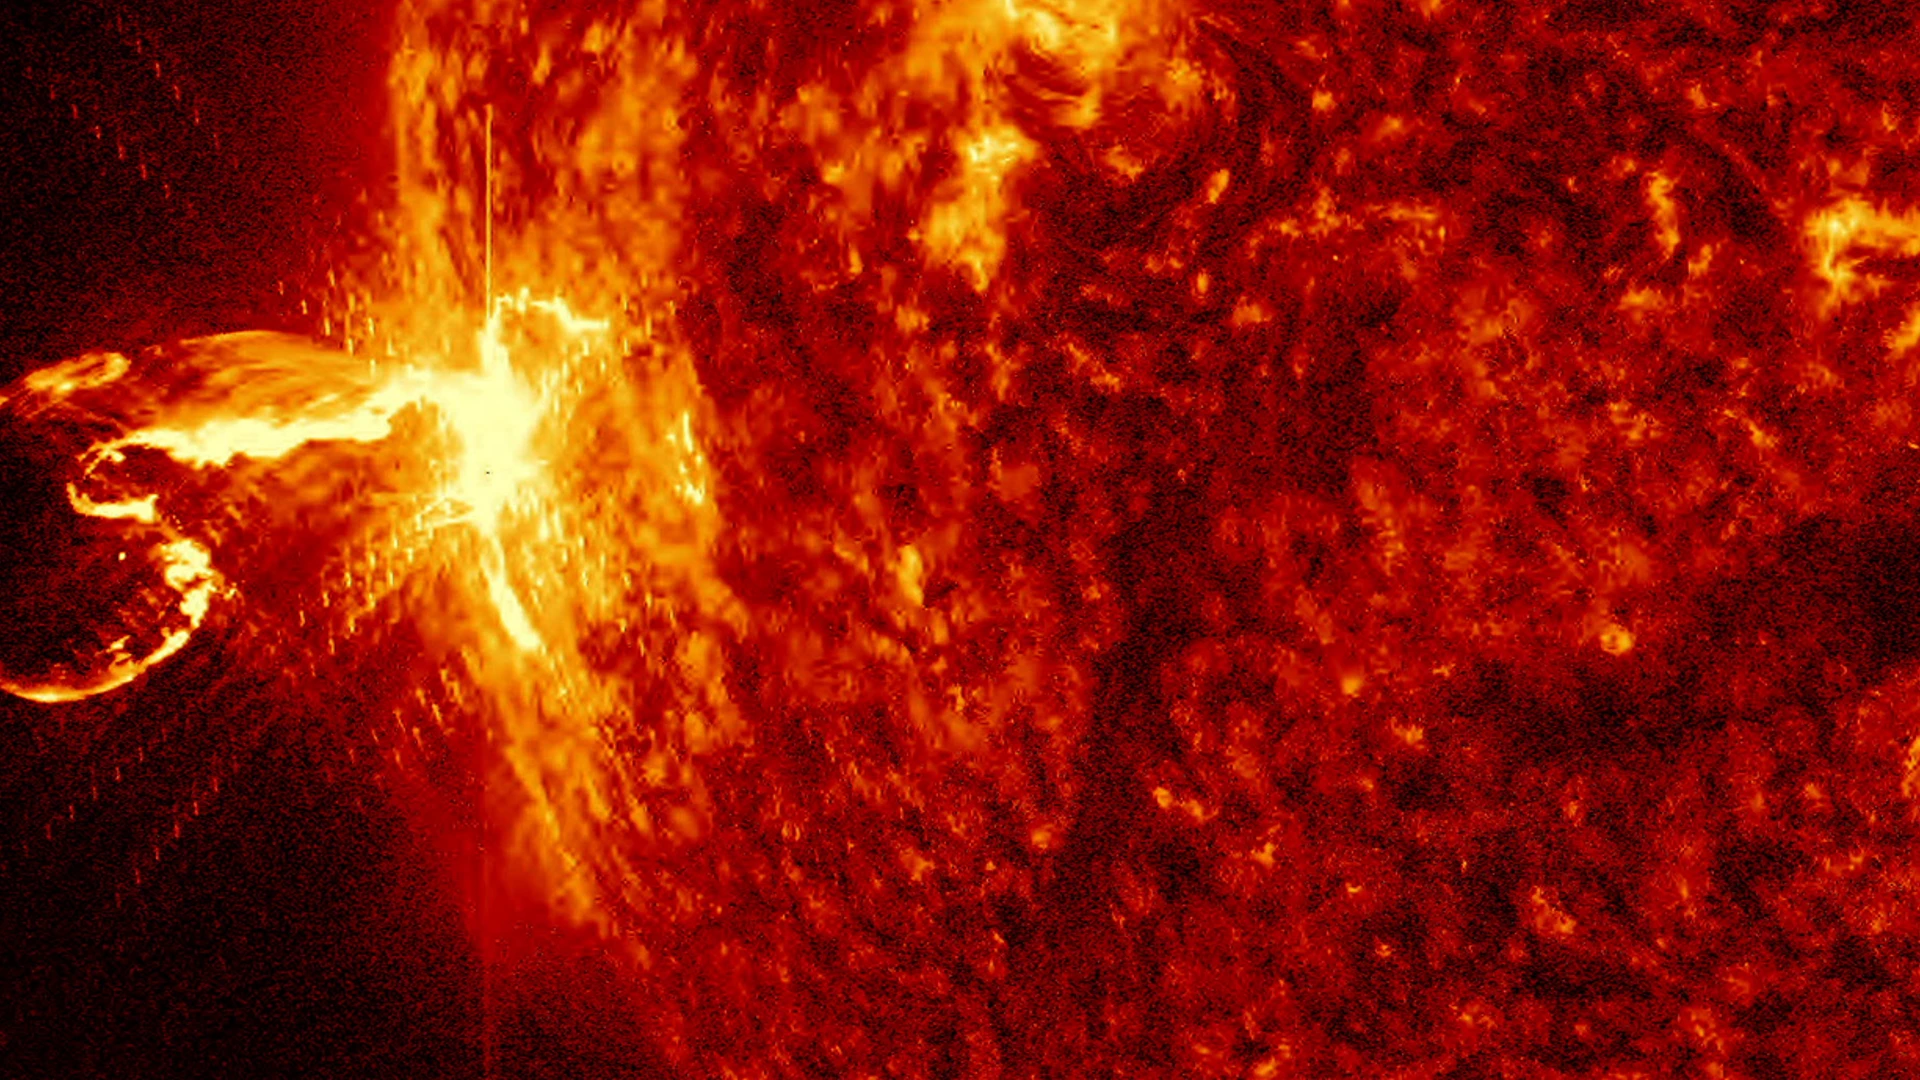 A solar flare explosion triggered a radio blackout over the Atlantic Ocean and Europe for more than an hour.